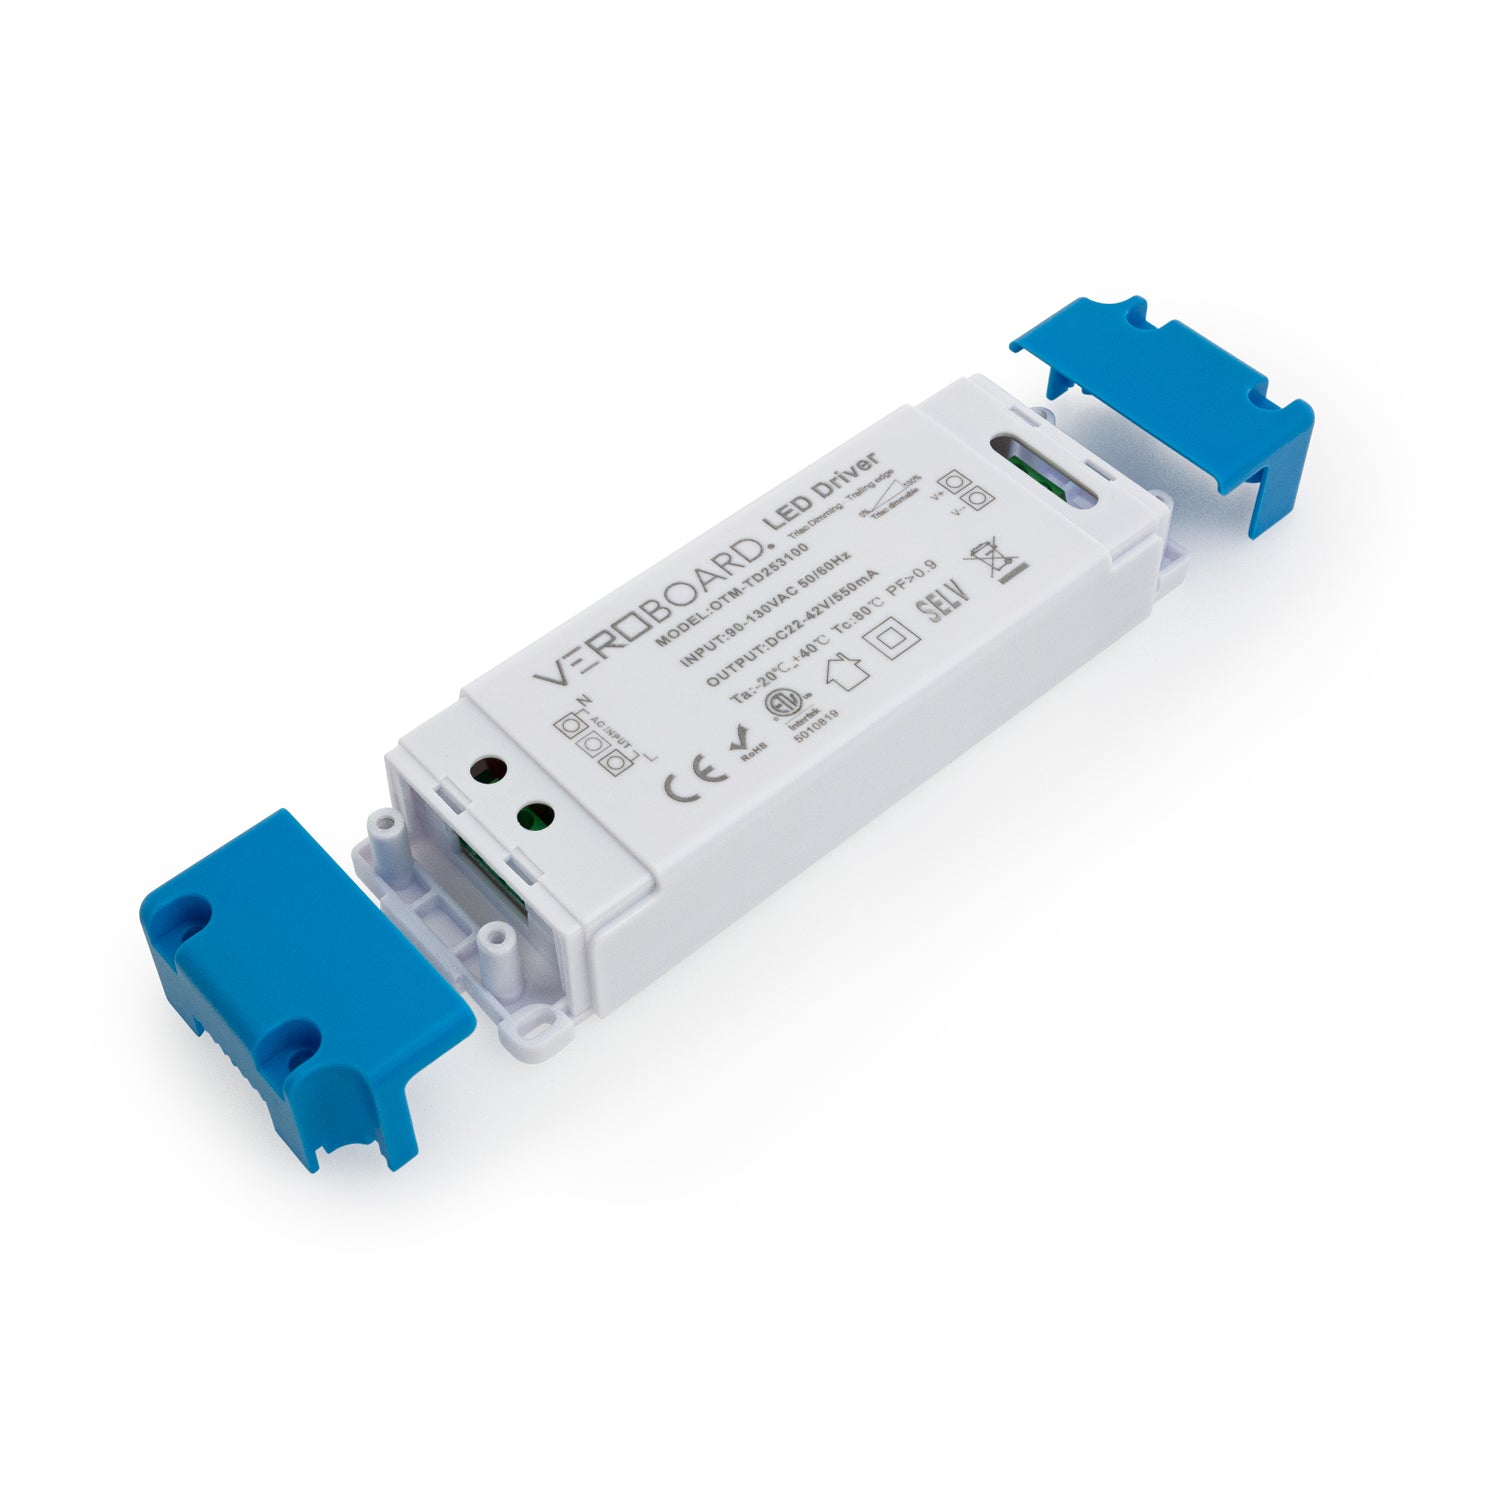 Constant Current 550ma 22-42V 20W Dimmable OTM-TD253100-550-20, Veroboard 